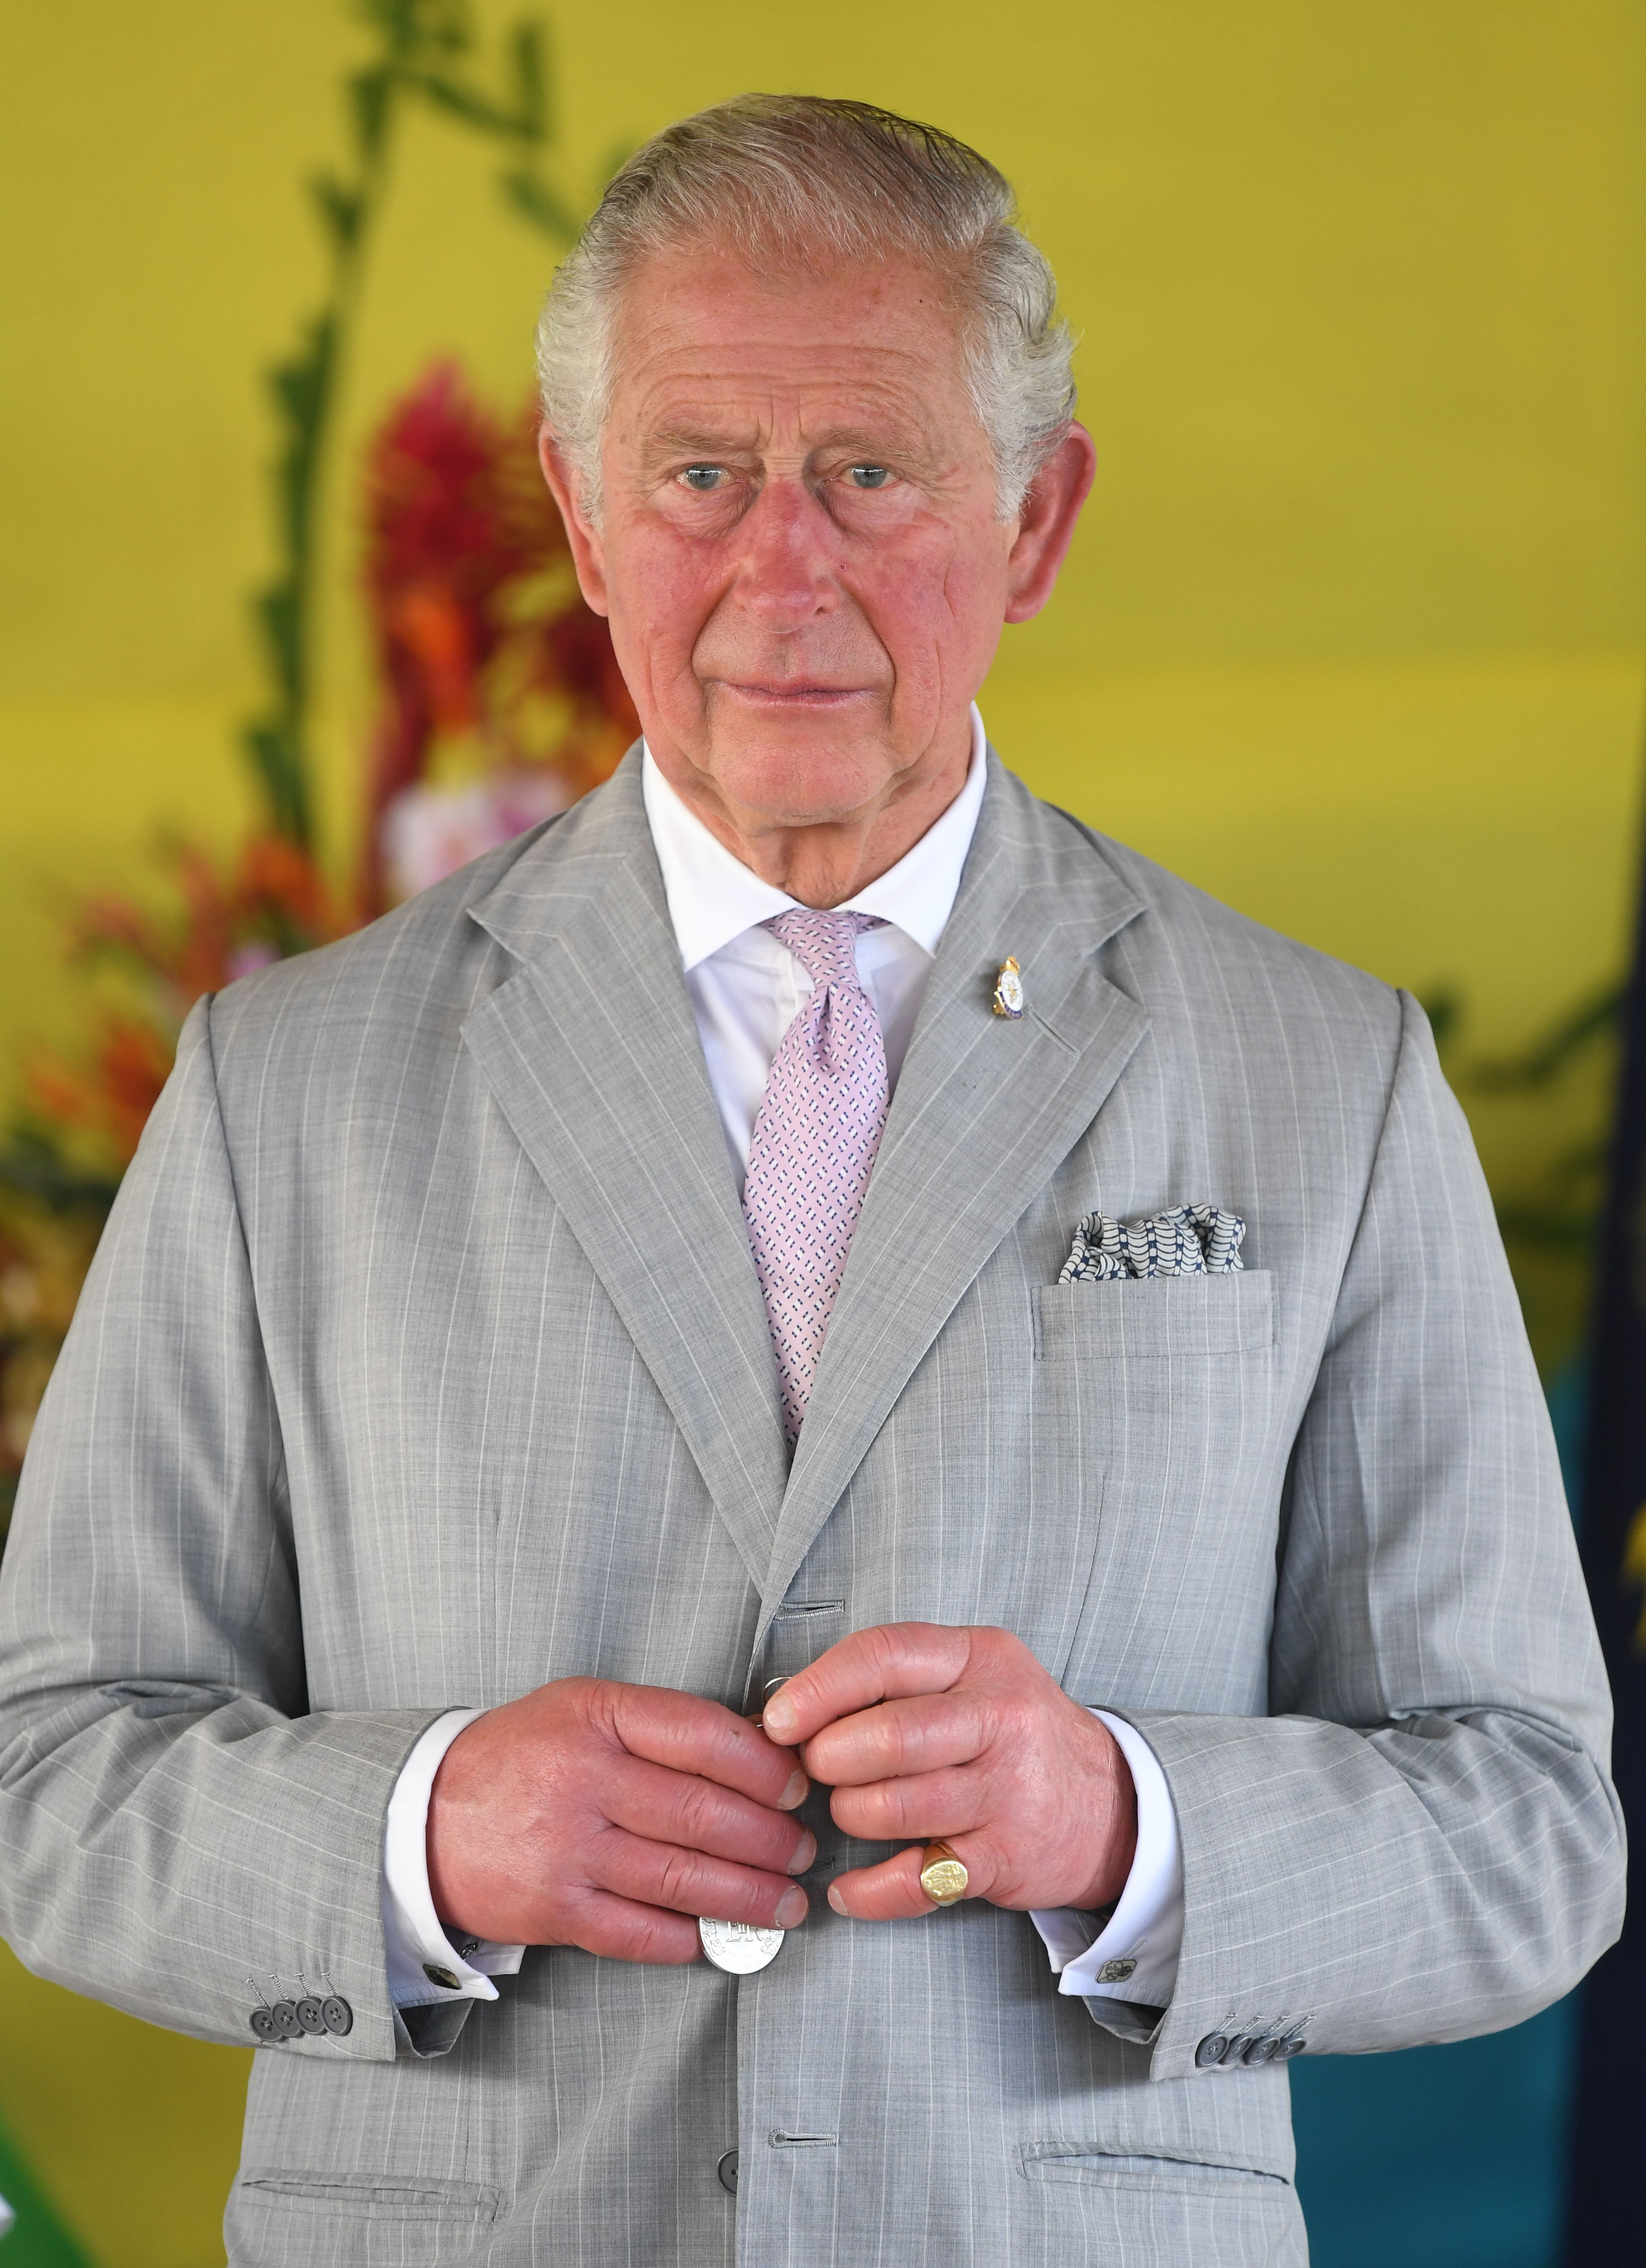 Prince Charles, Prince of Wales, undertakes a series of Investitures during a ceremony at the Recreational Leaf Hut in Honiara, Guadalcanal Island, Solomon Islands, on November 24, 2019. | Source: Getty Images